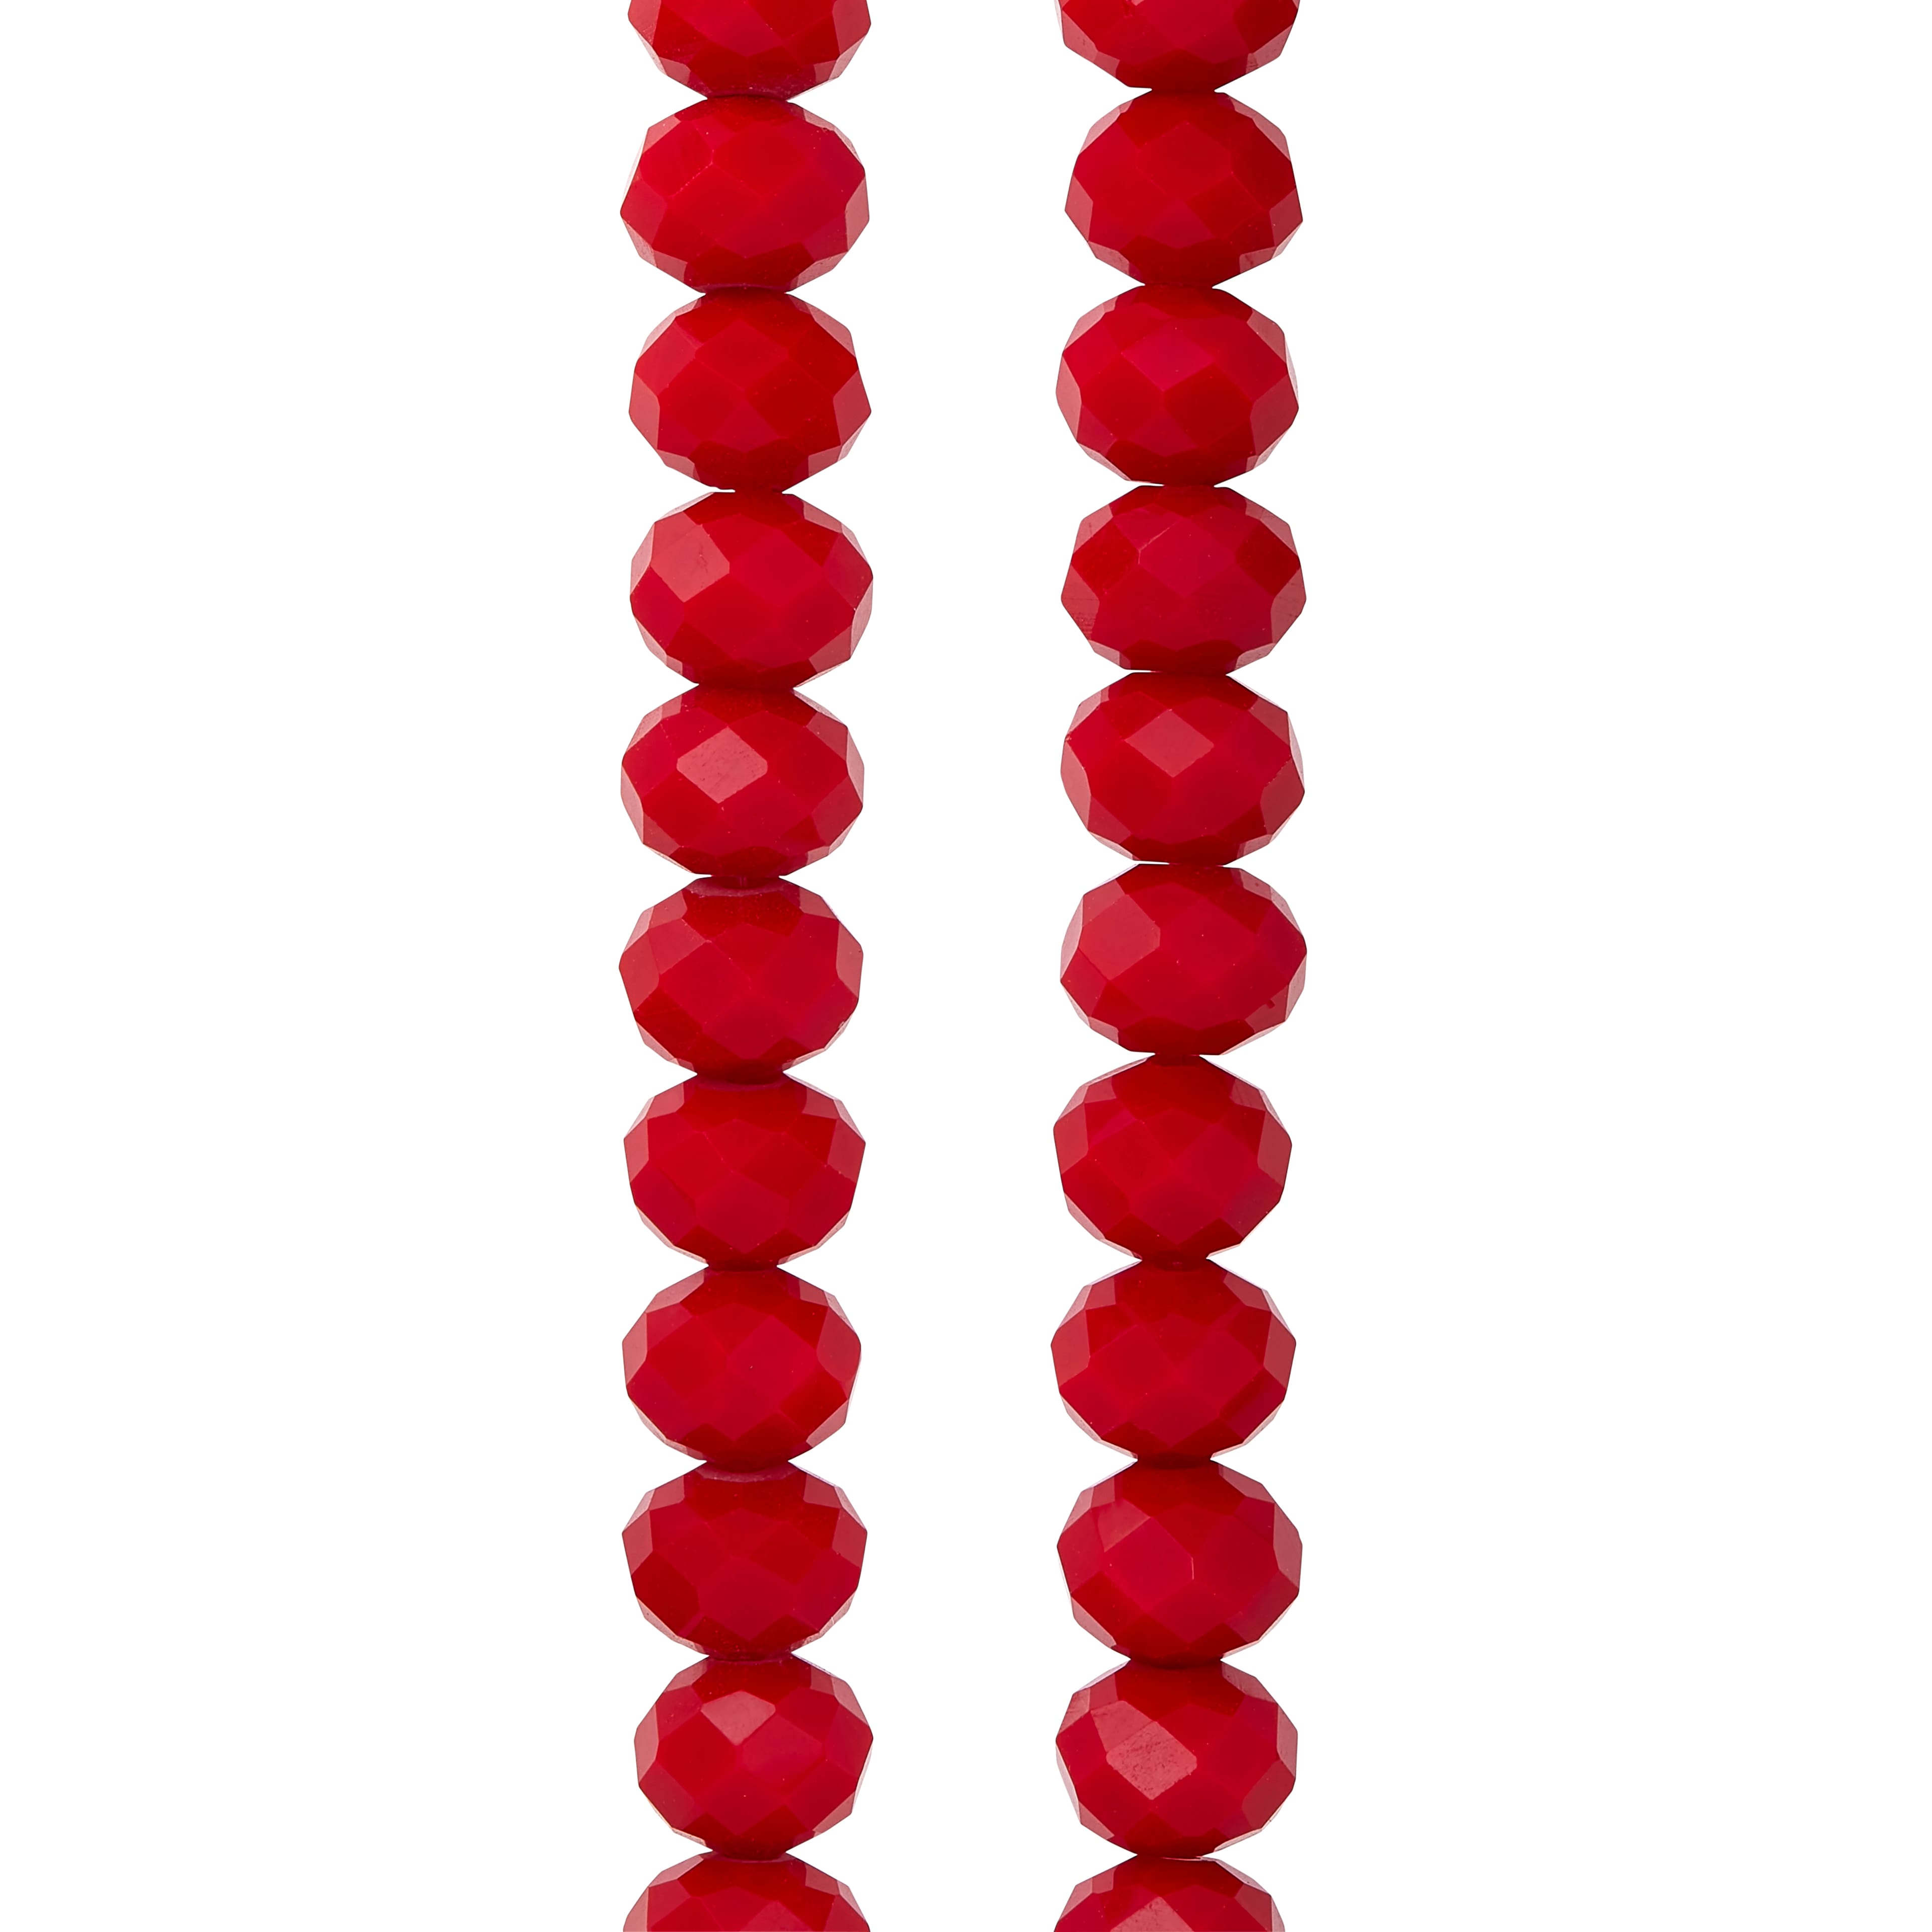 Bead Gallery 8mm Red Faceted Glass Rondelle Beads - each